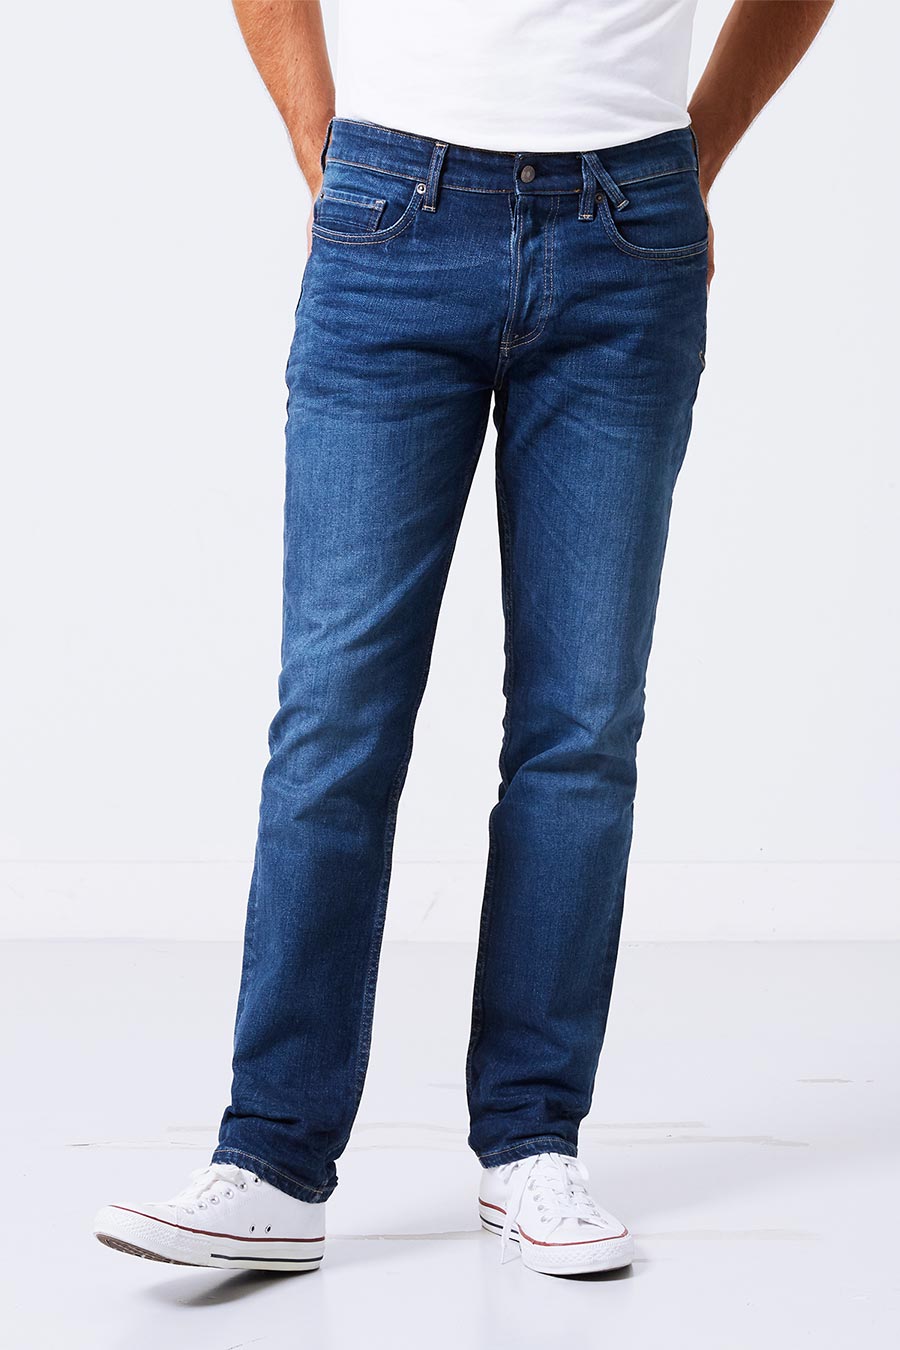 Men's jeans fit guide | America Today